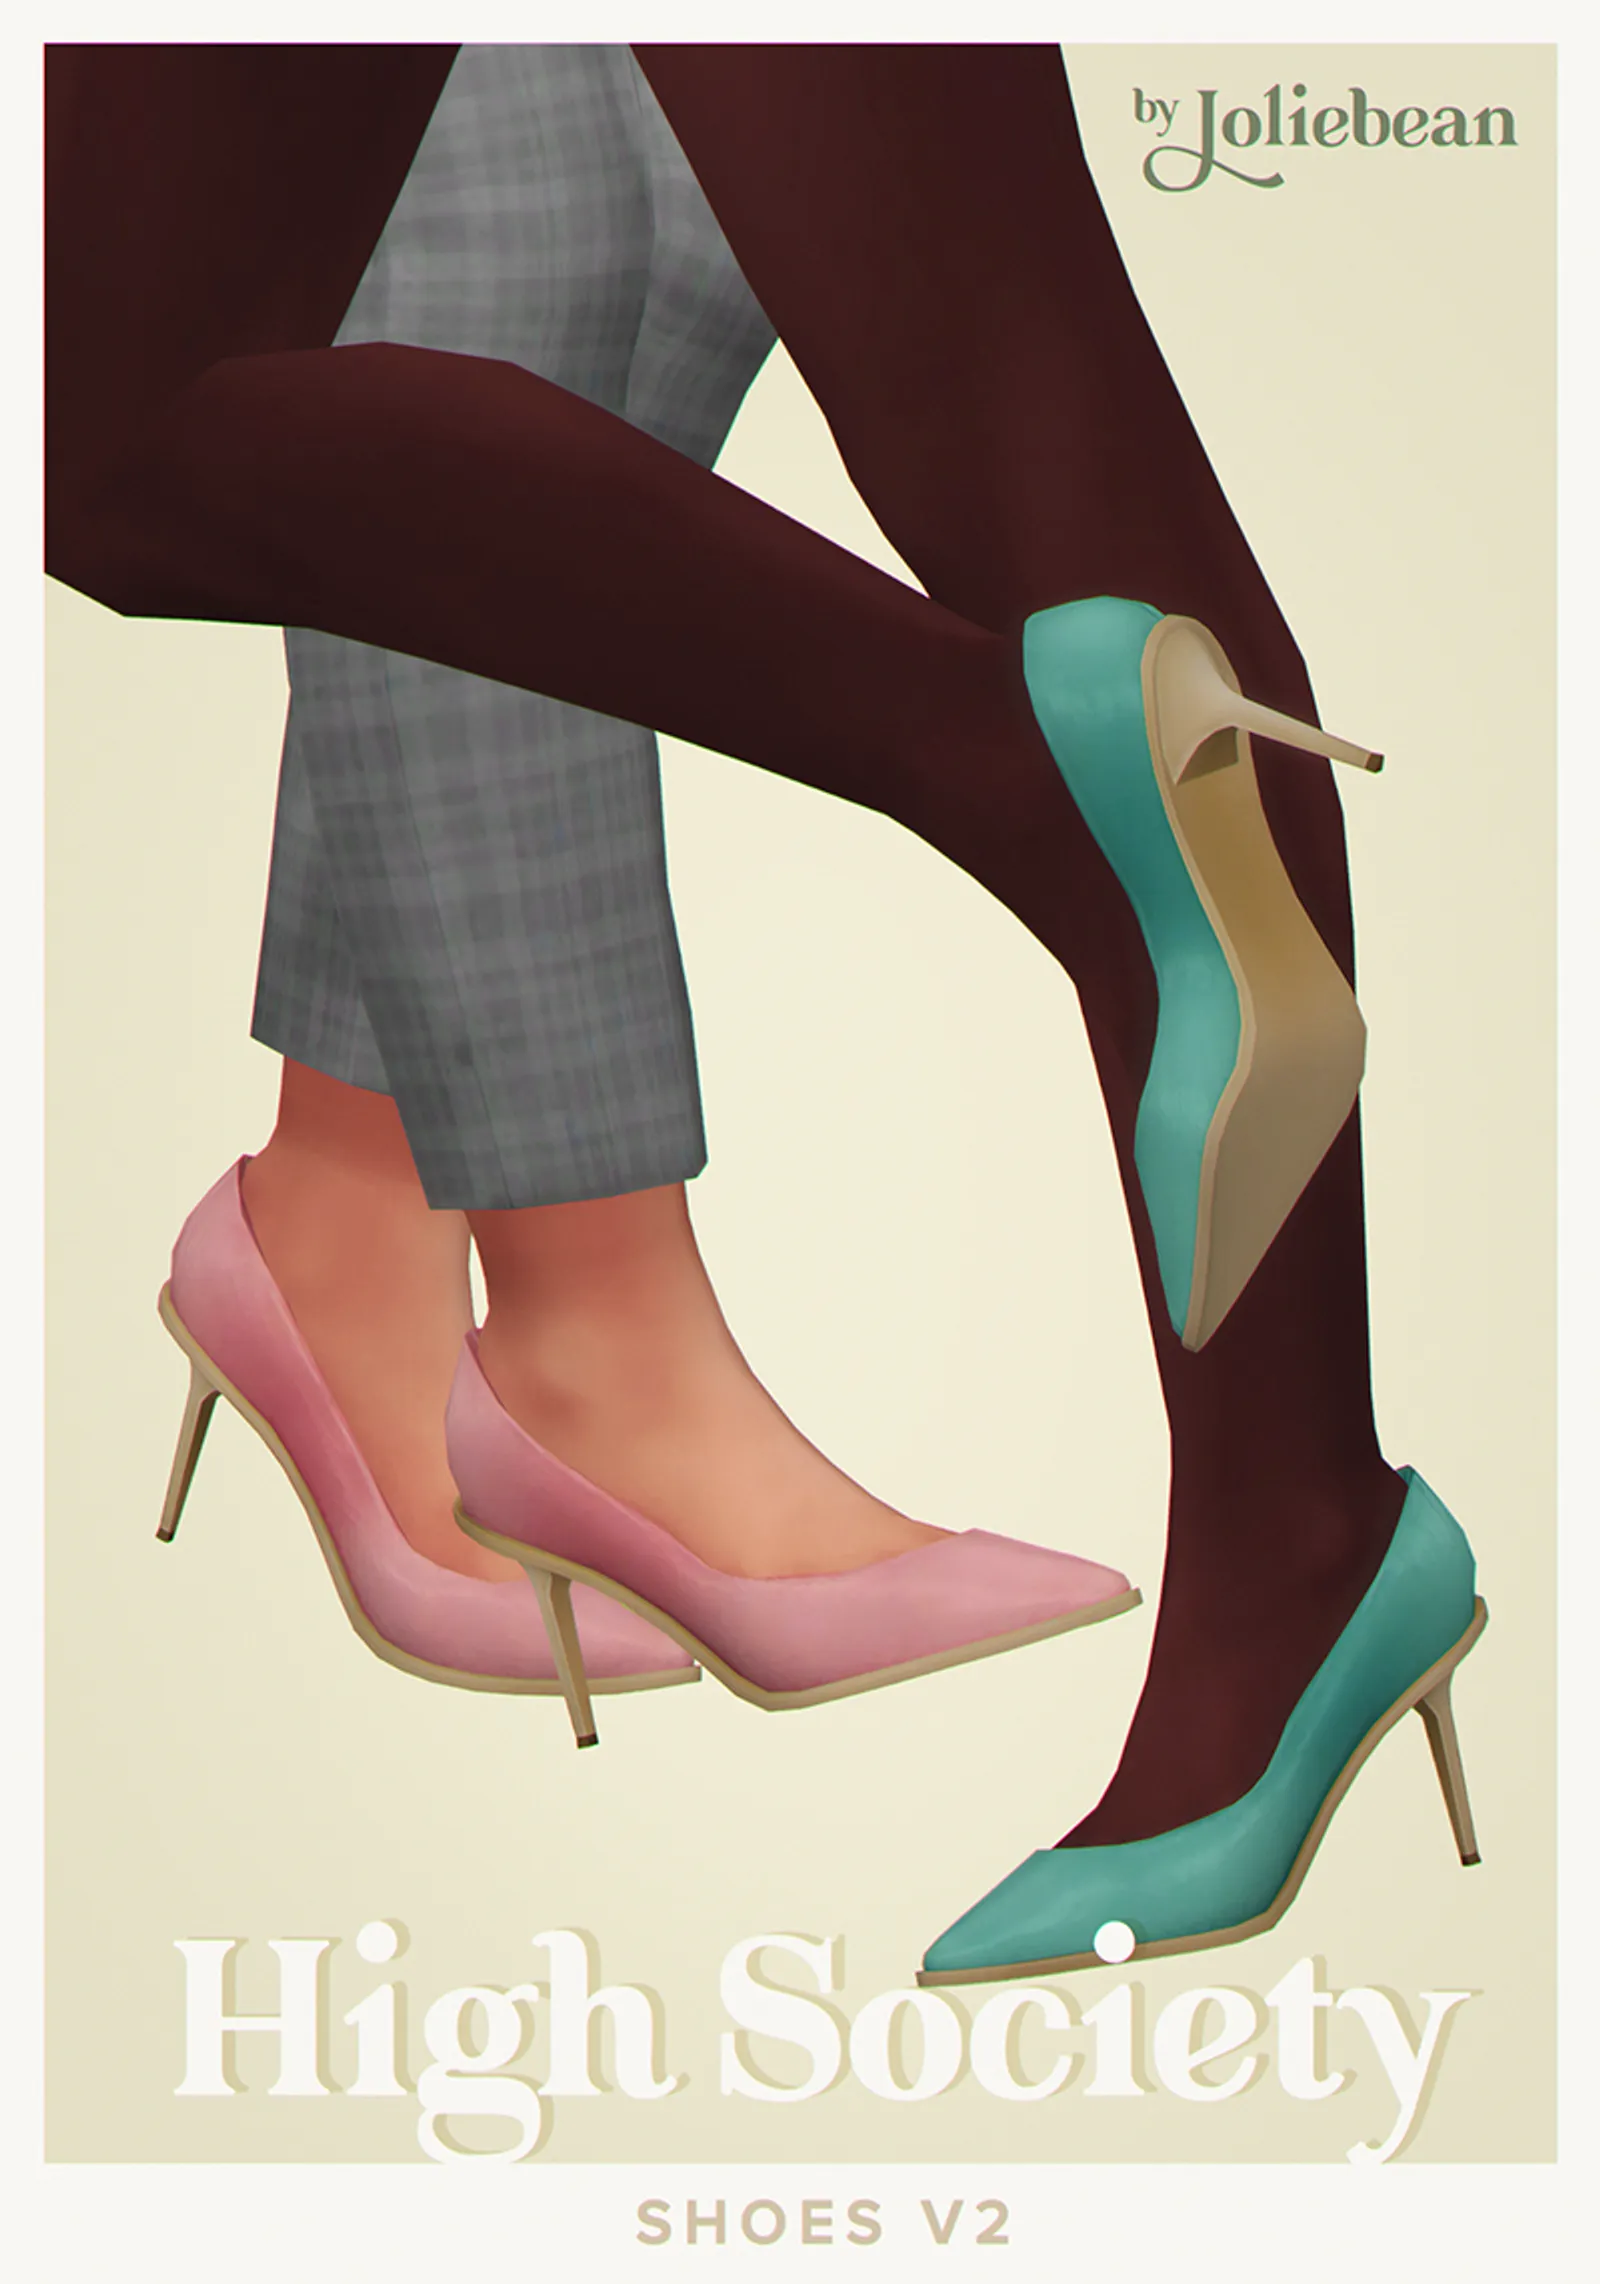 High Society Shoes v2 by Joliebean